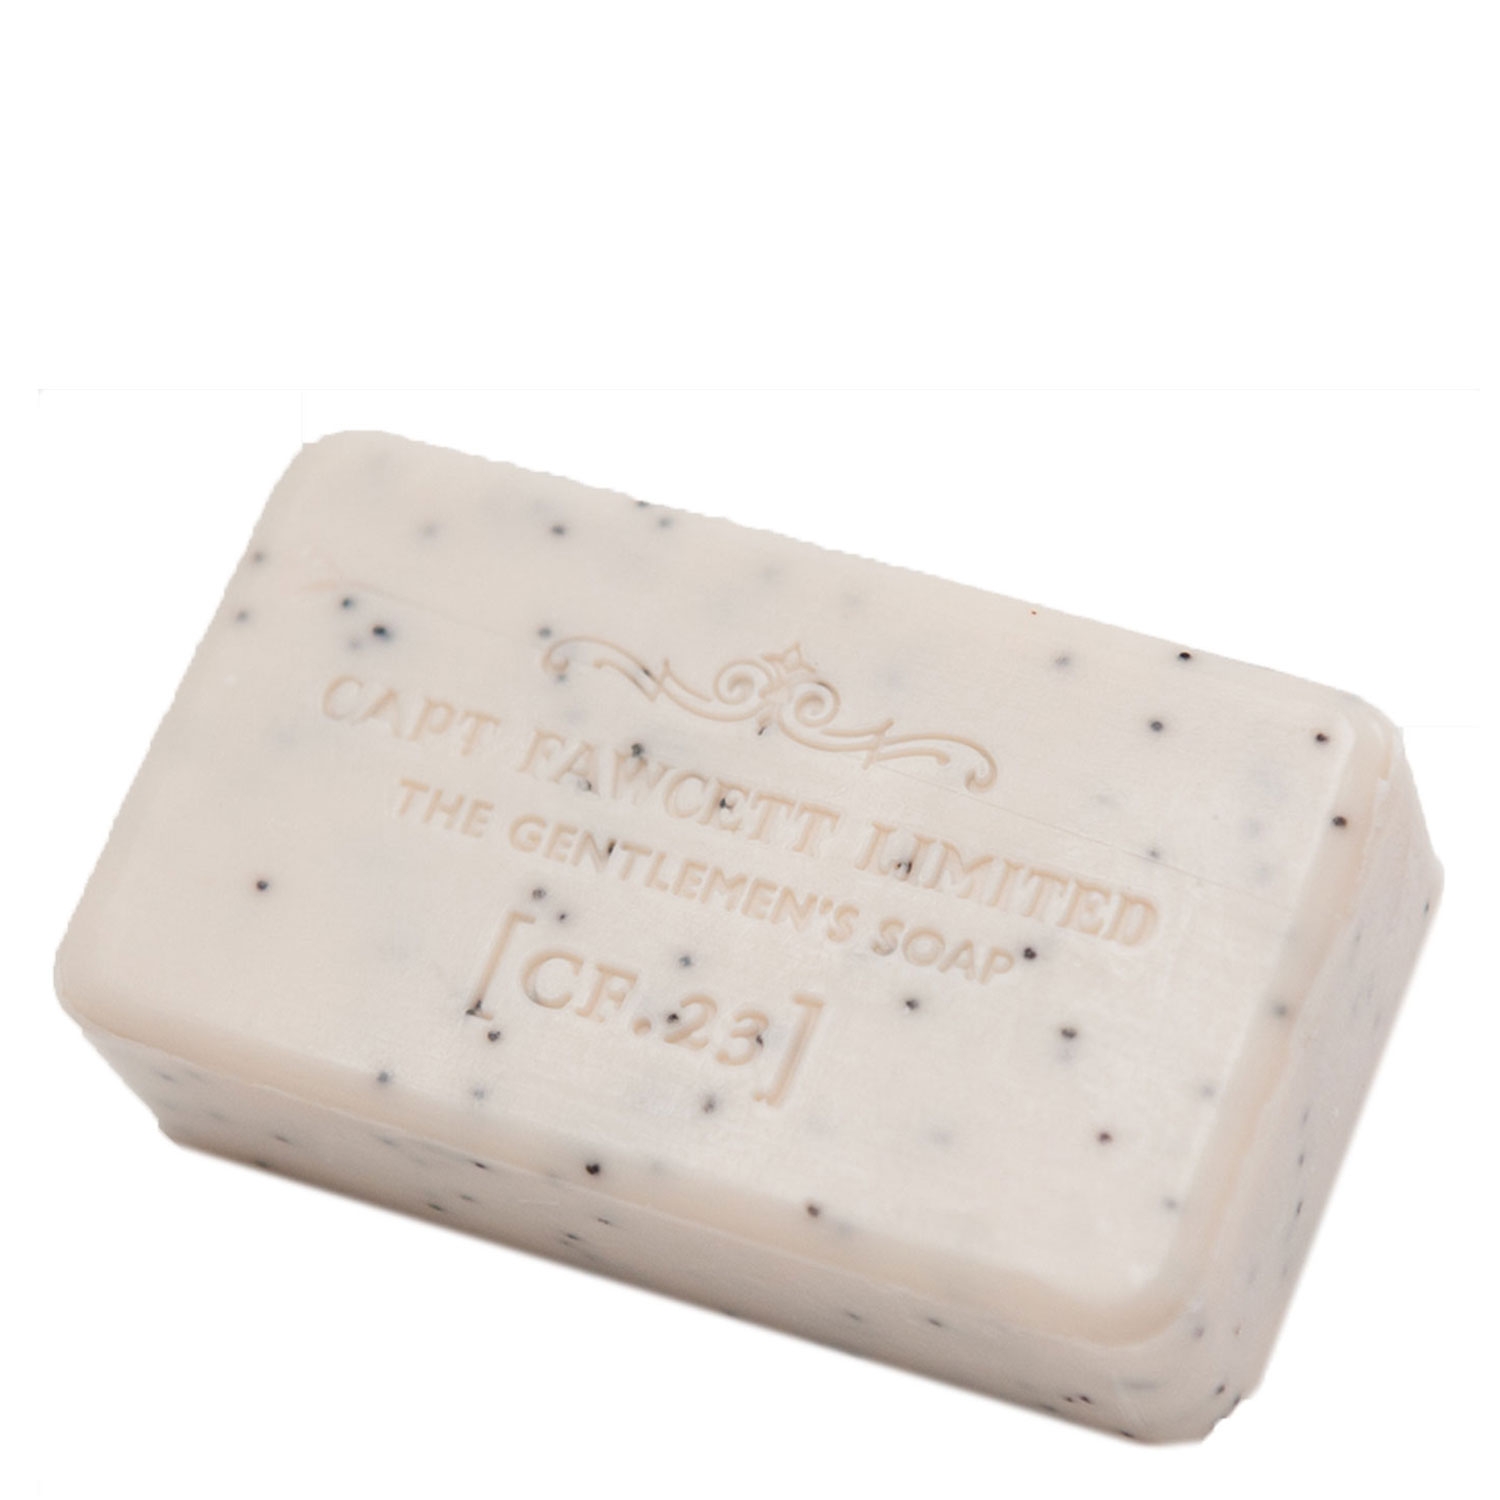 Product image from Capt. Fawcett Care - Gentlemans Soap